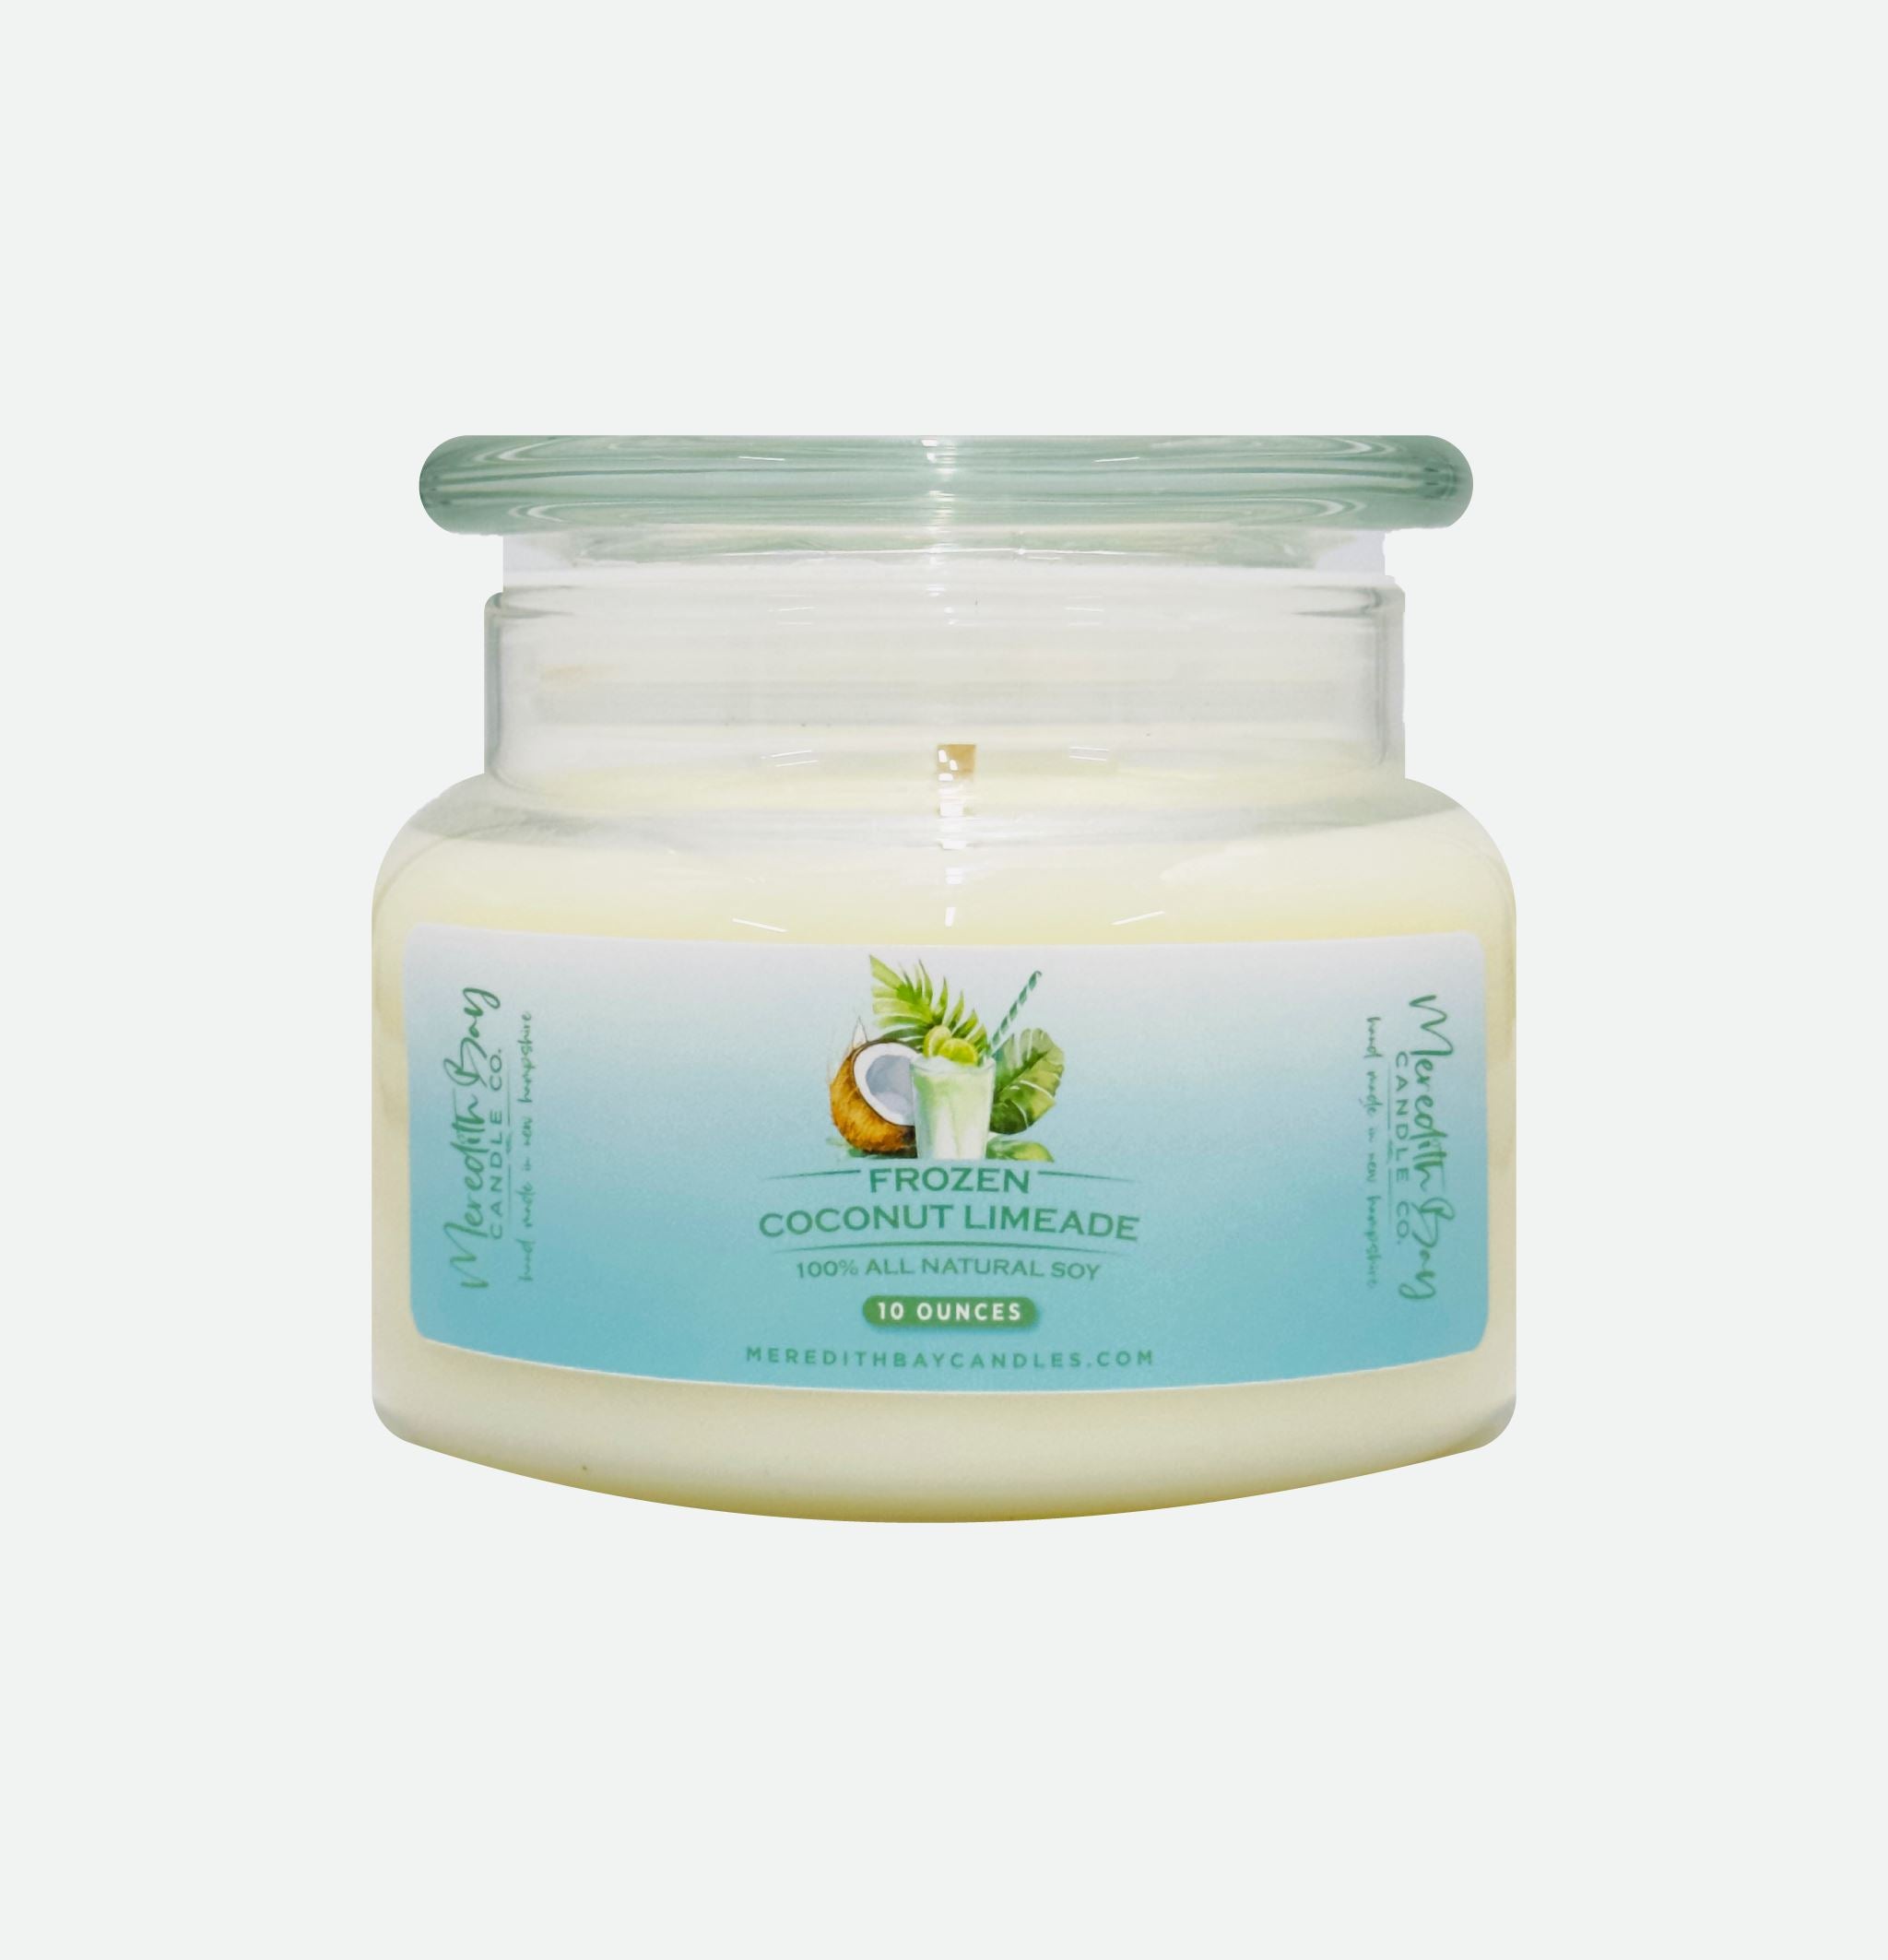 Frozen Coconut Limeade Soy Candle Meredith Bay Candle Co 10.0 Oz 